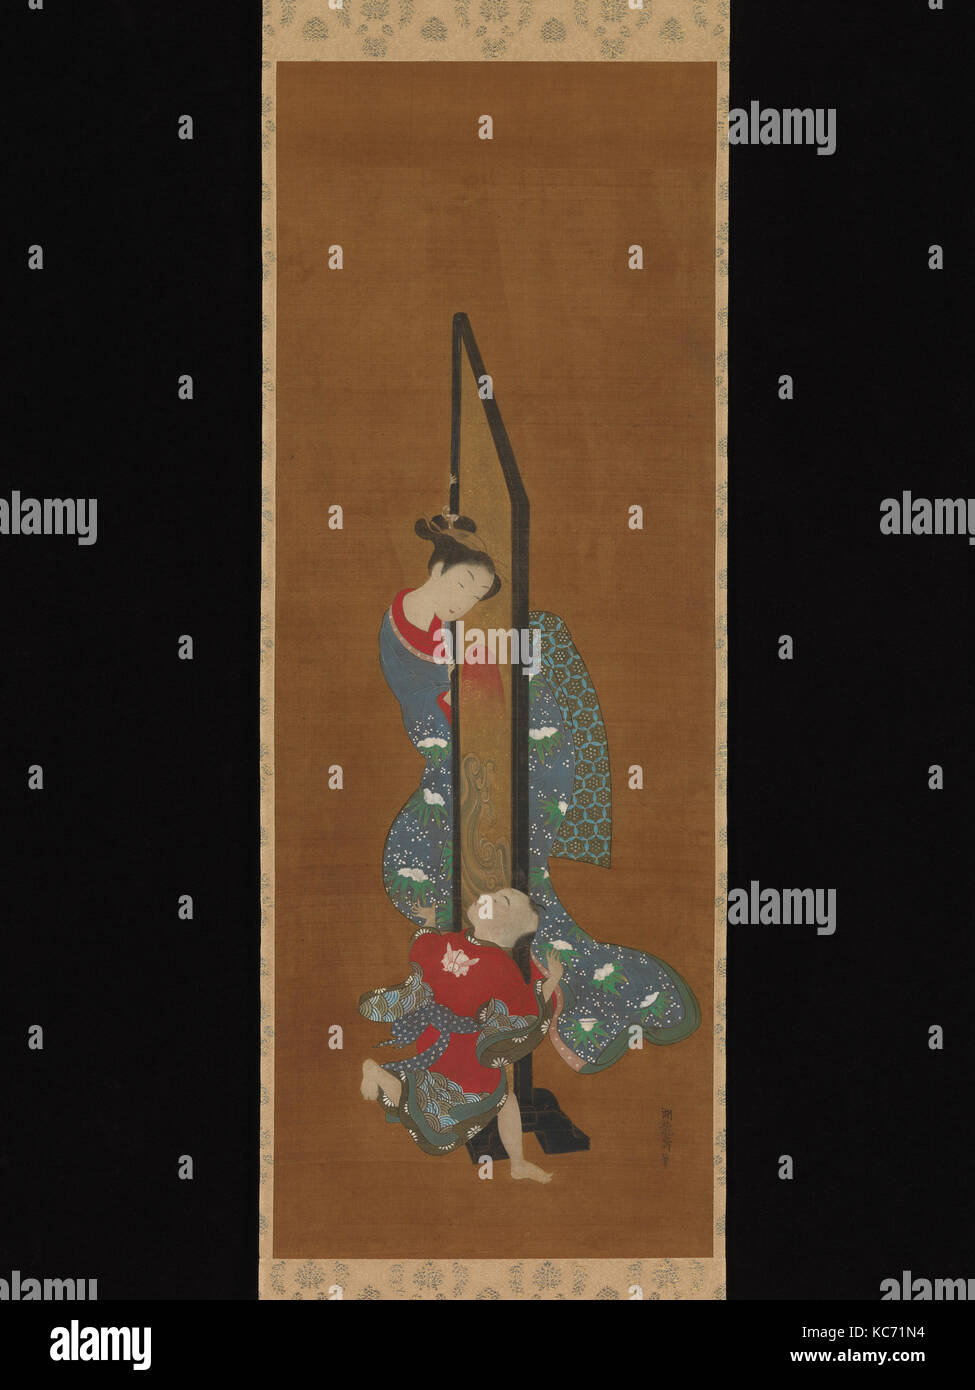 Mother and Child at Play, Isoda Koryūsai, 18th century Stock Photo